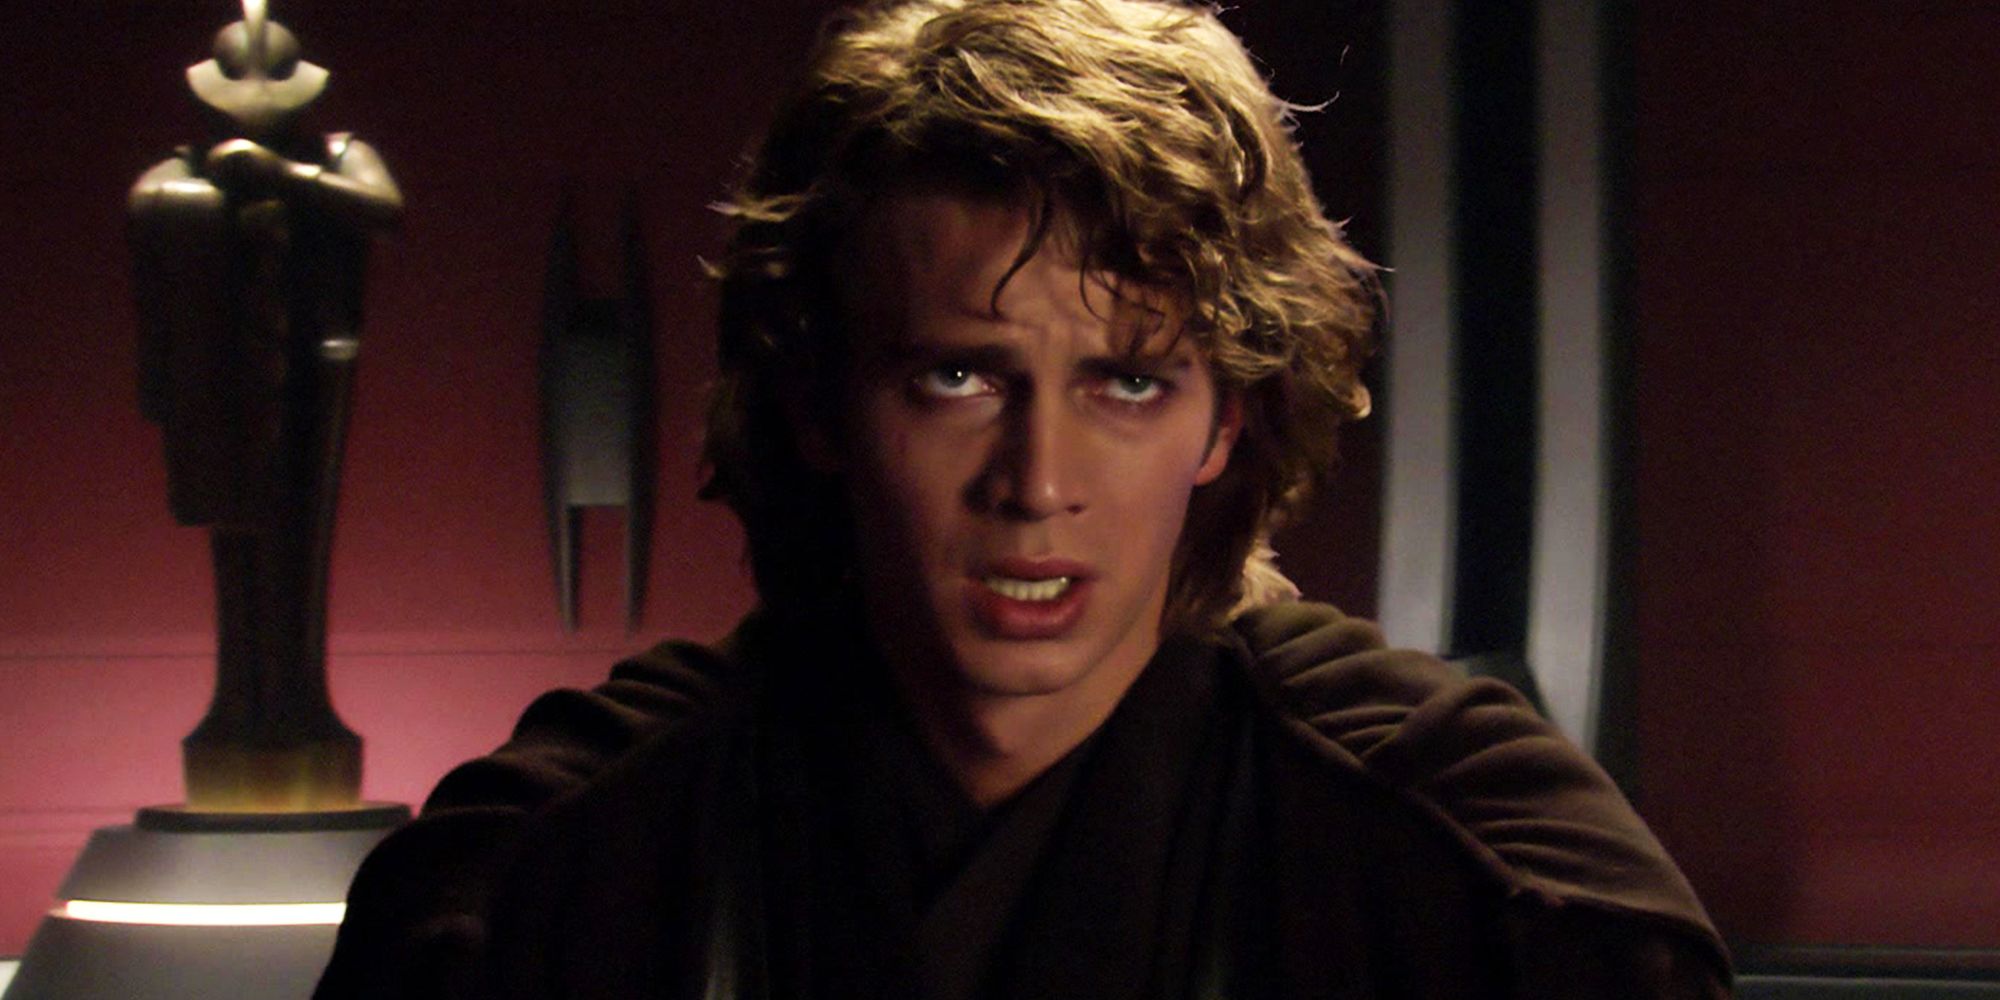 Hayden Christensen's Anakin Skywalker falls to the dark side and is christened Darth Vader, and he looks up at Palpatine in agony